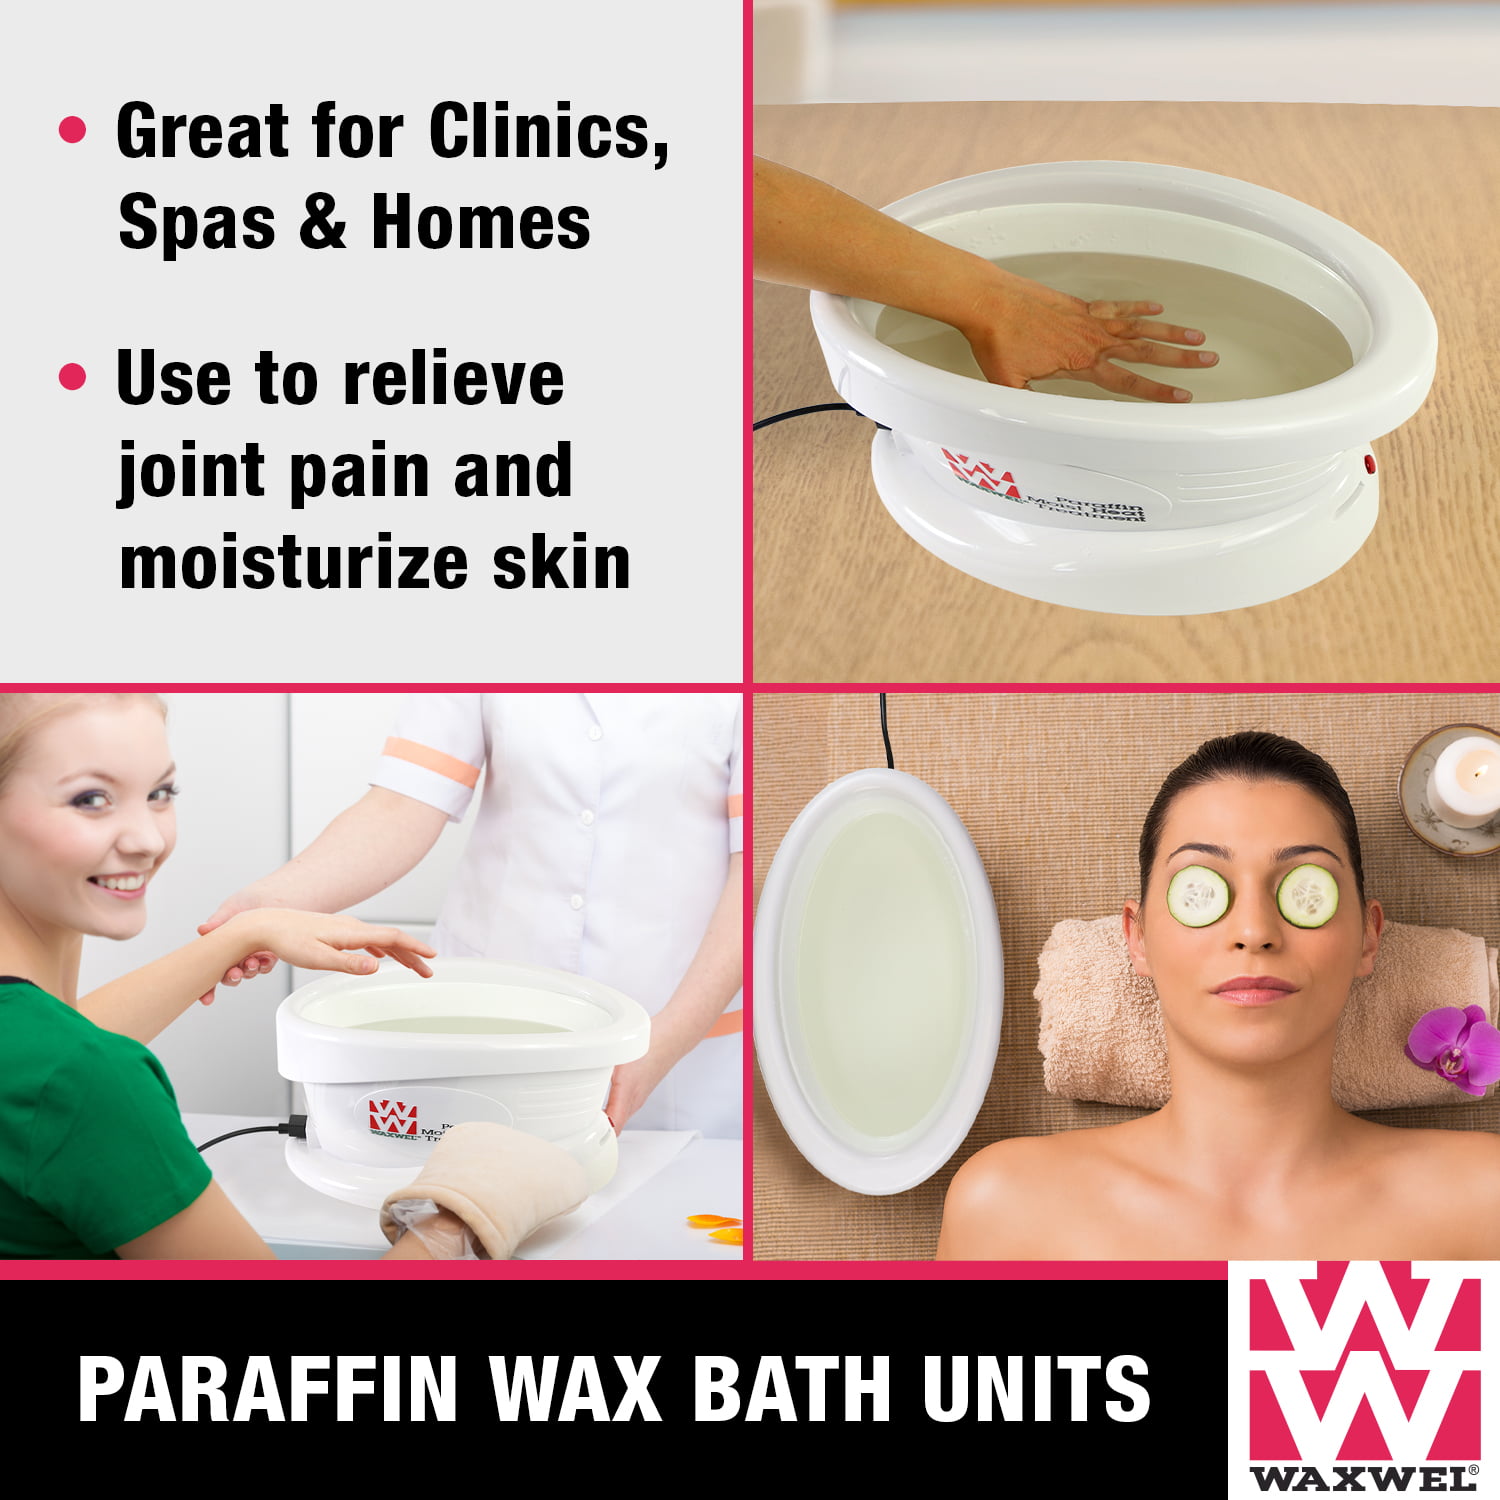 New Road Beauty Paraffin Wax Deluxe Bath Warmer, 4 Liter Capacity for Hands  and Feet, Personalized Temperature Touchscreen Display, Use for Arthritis  and Joint Pain